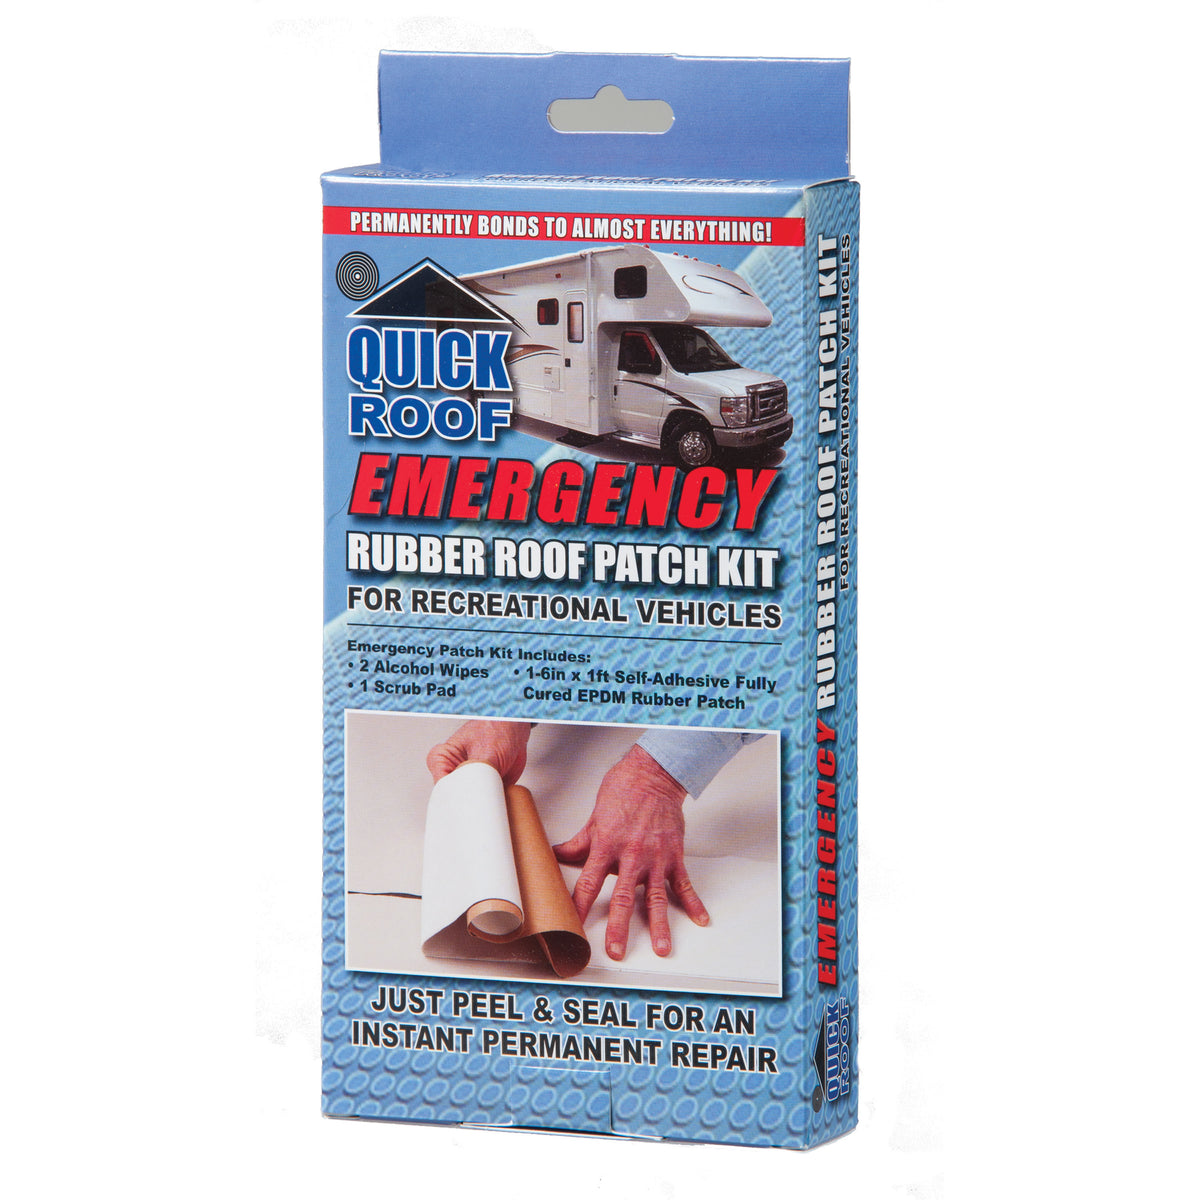 Cofair Products RR612 Quick Roof Emergency Rubber Roof Patch Kit